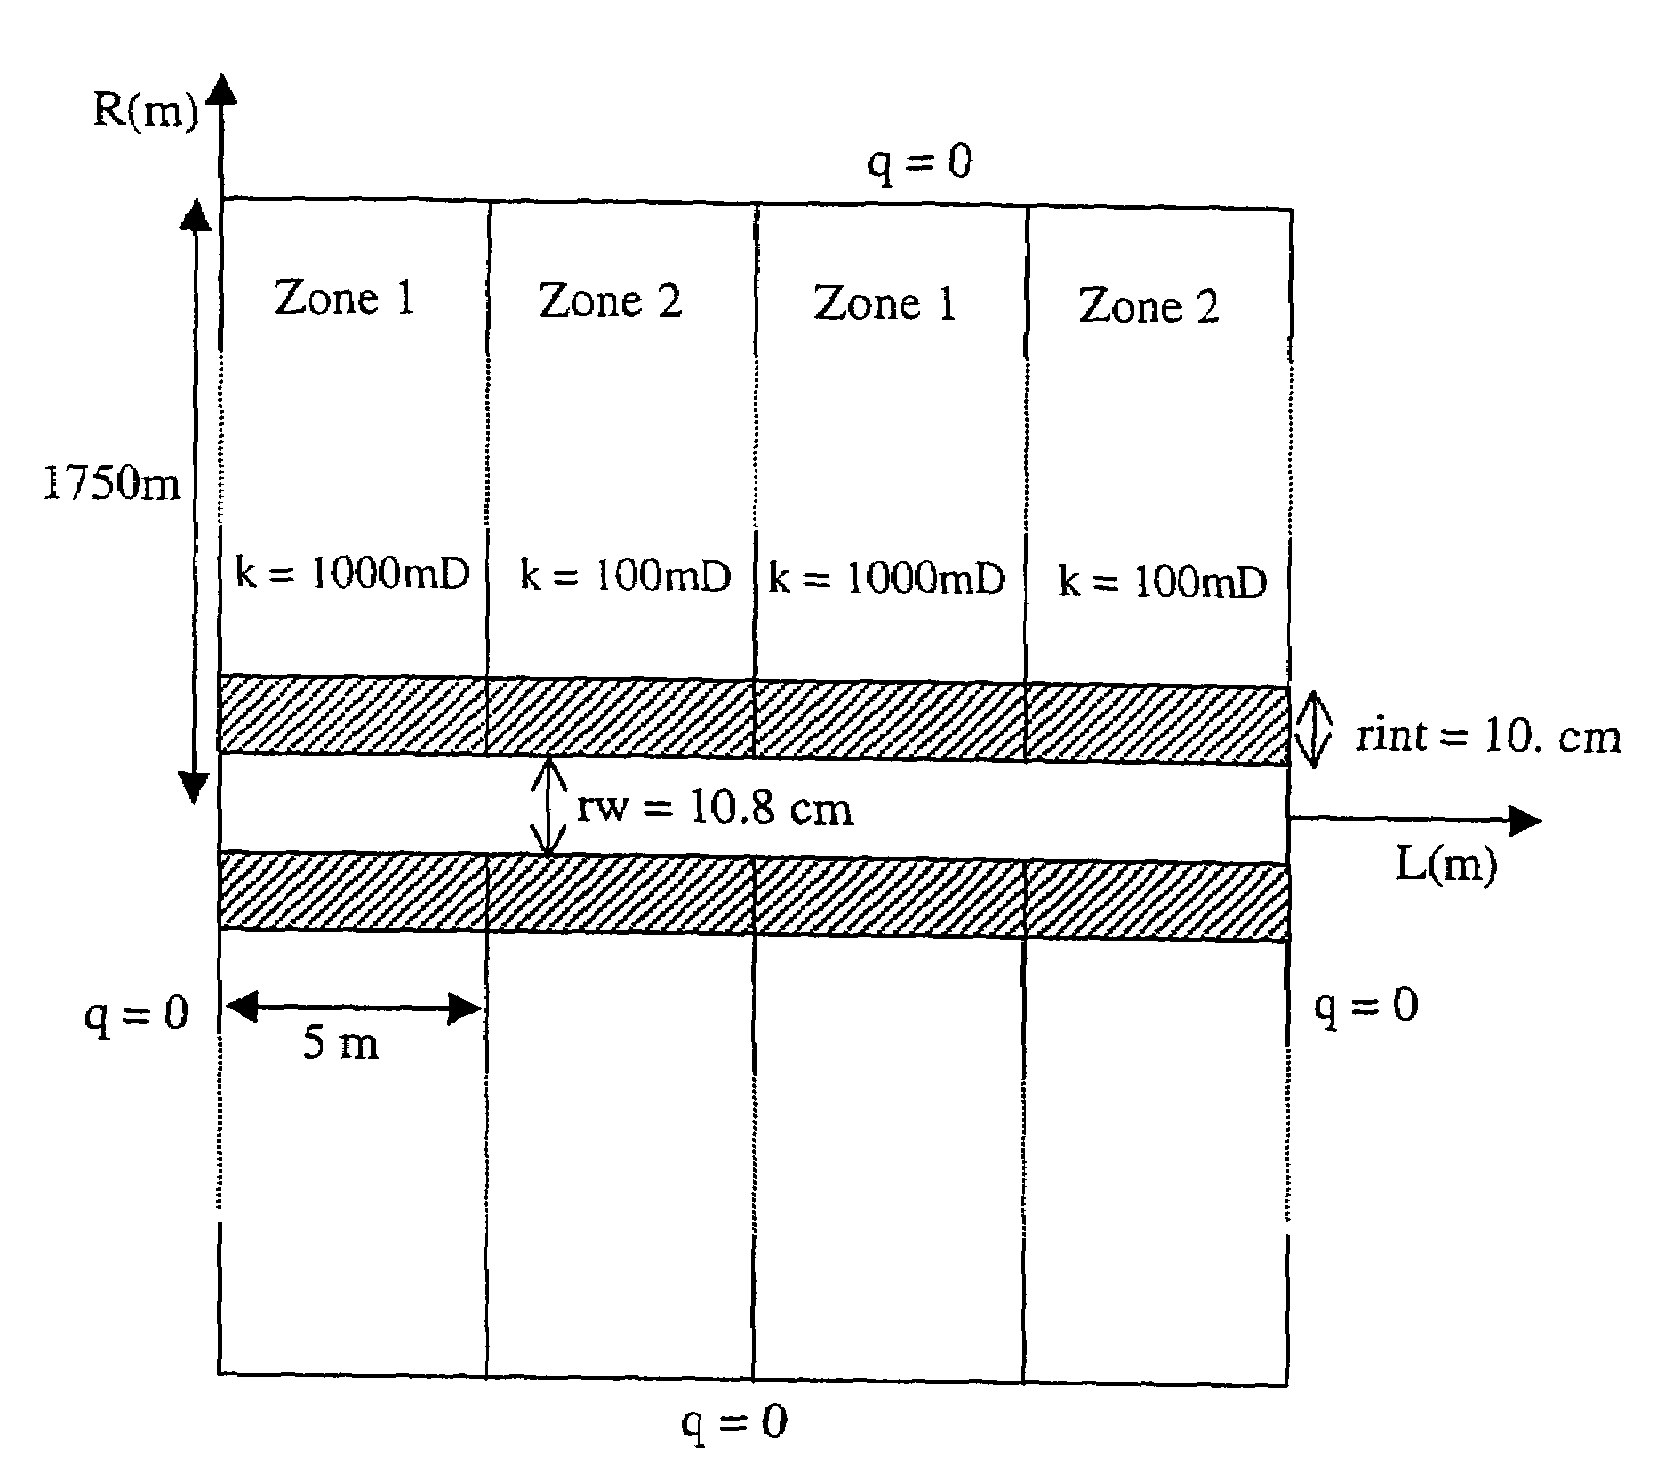 Method of determining by numerical simulation the restoration conditions, by the fluids of a reservoir, of a complex well damaged by drilling operations